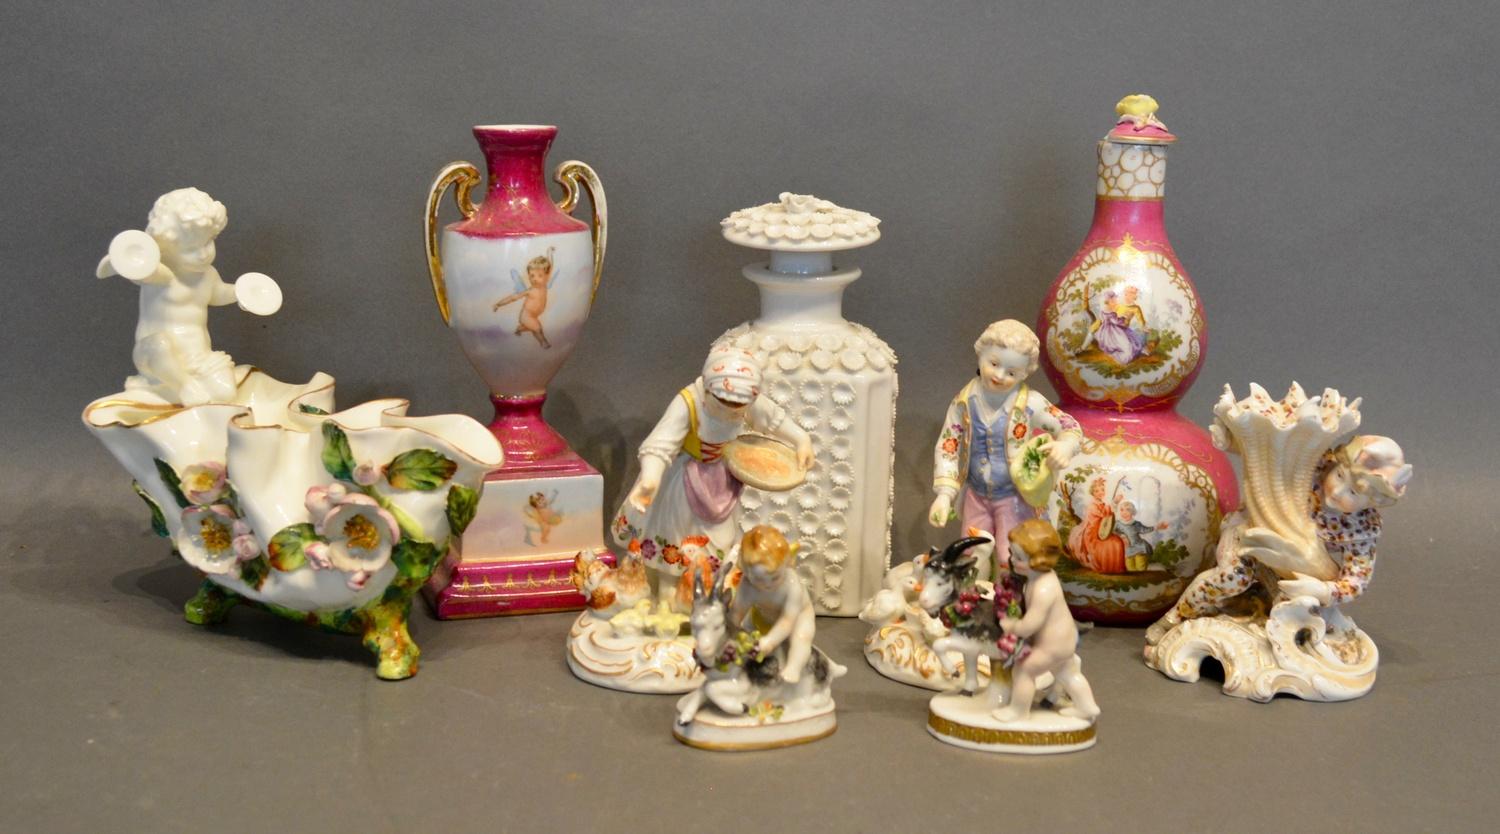 A Dresden Porcelain Double Gourd Vase, together with various other ceramics